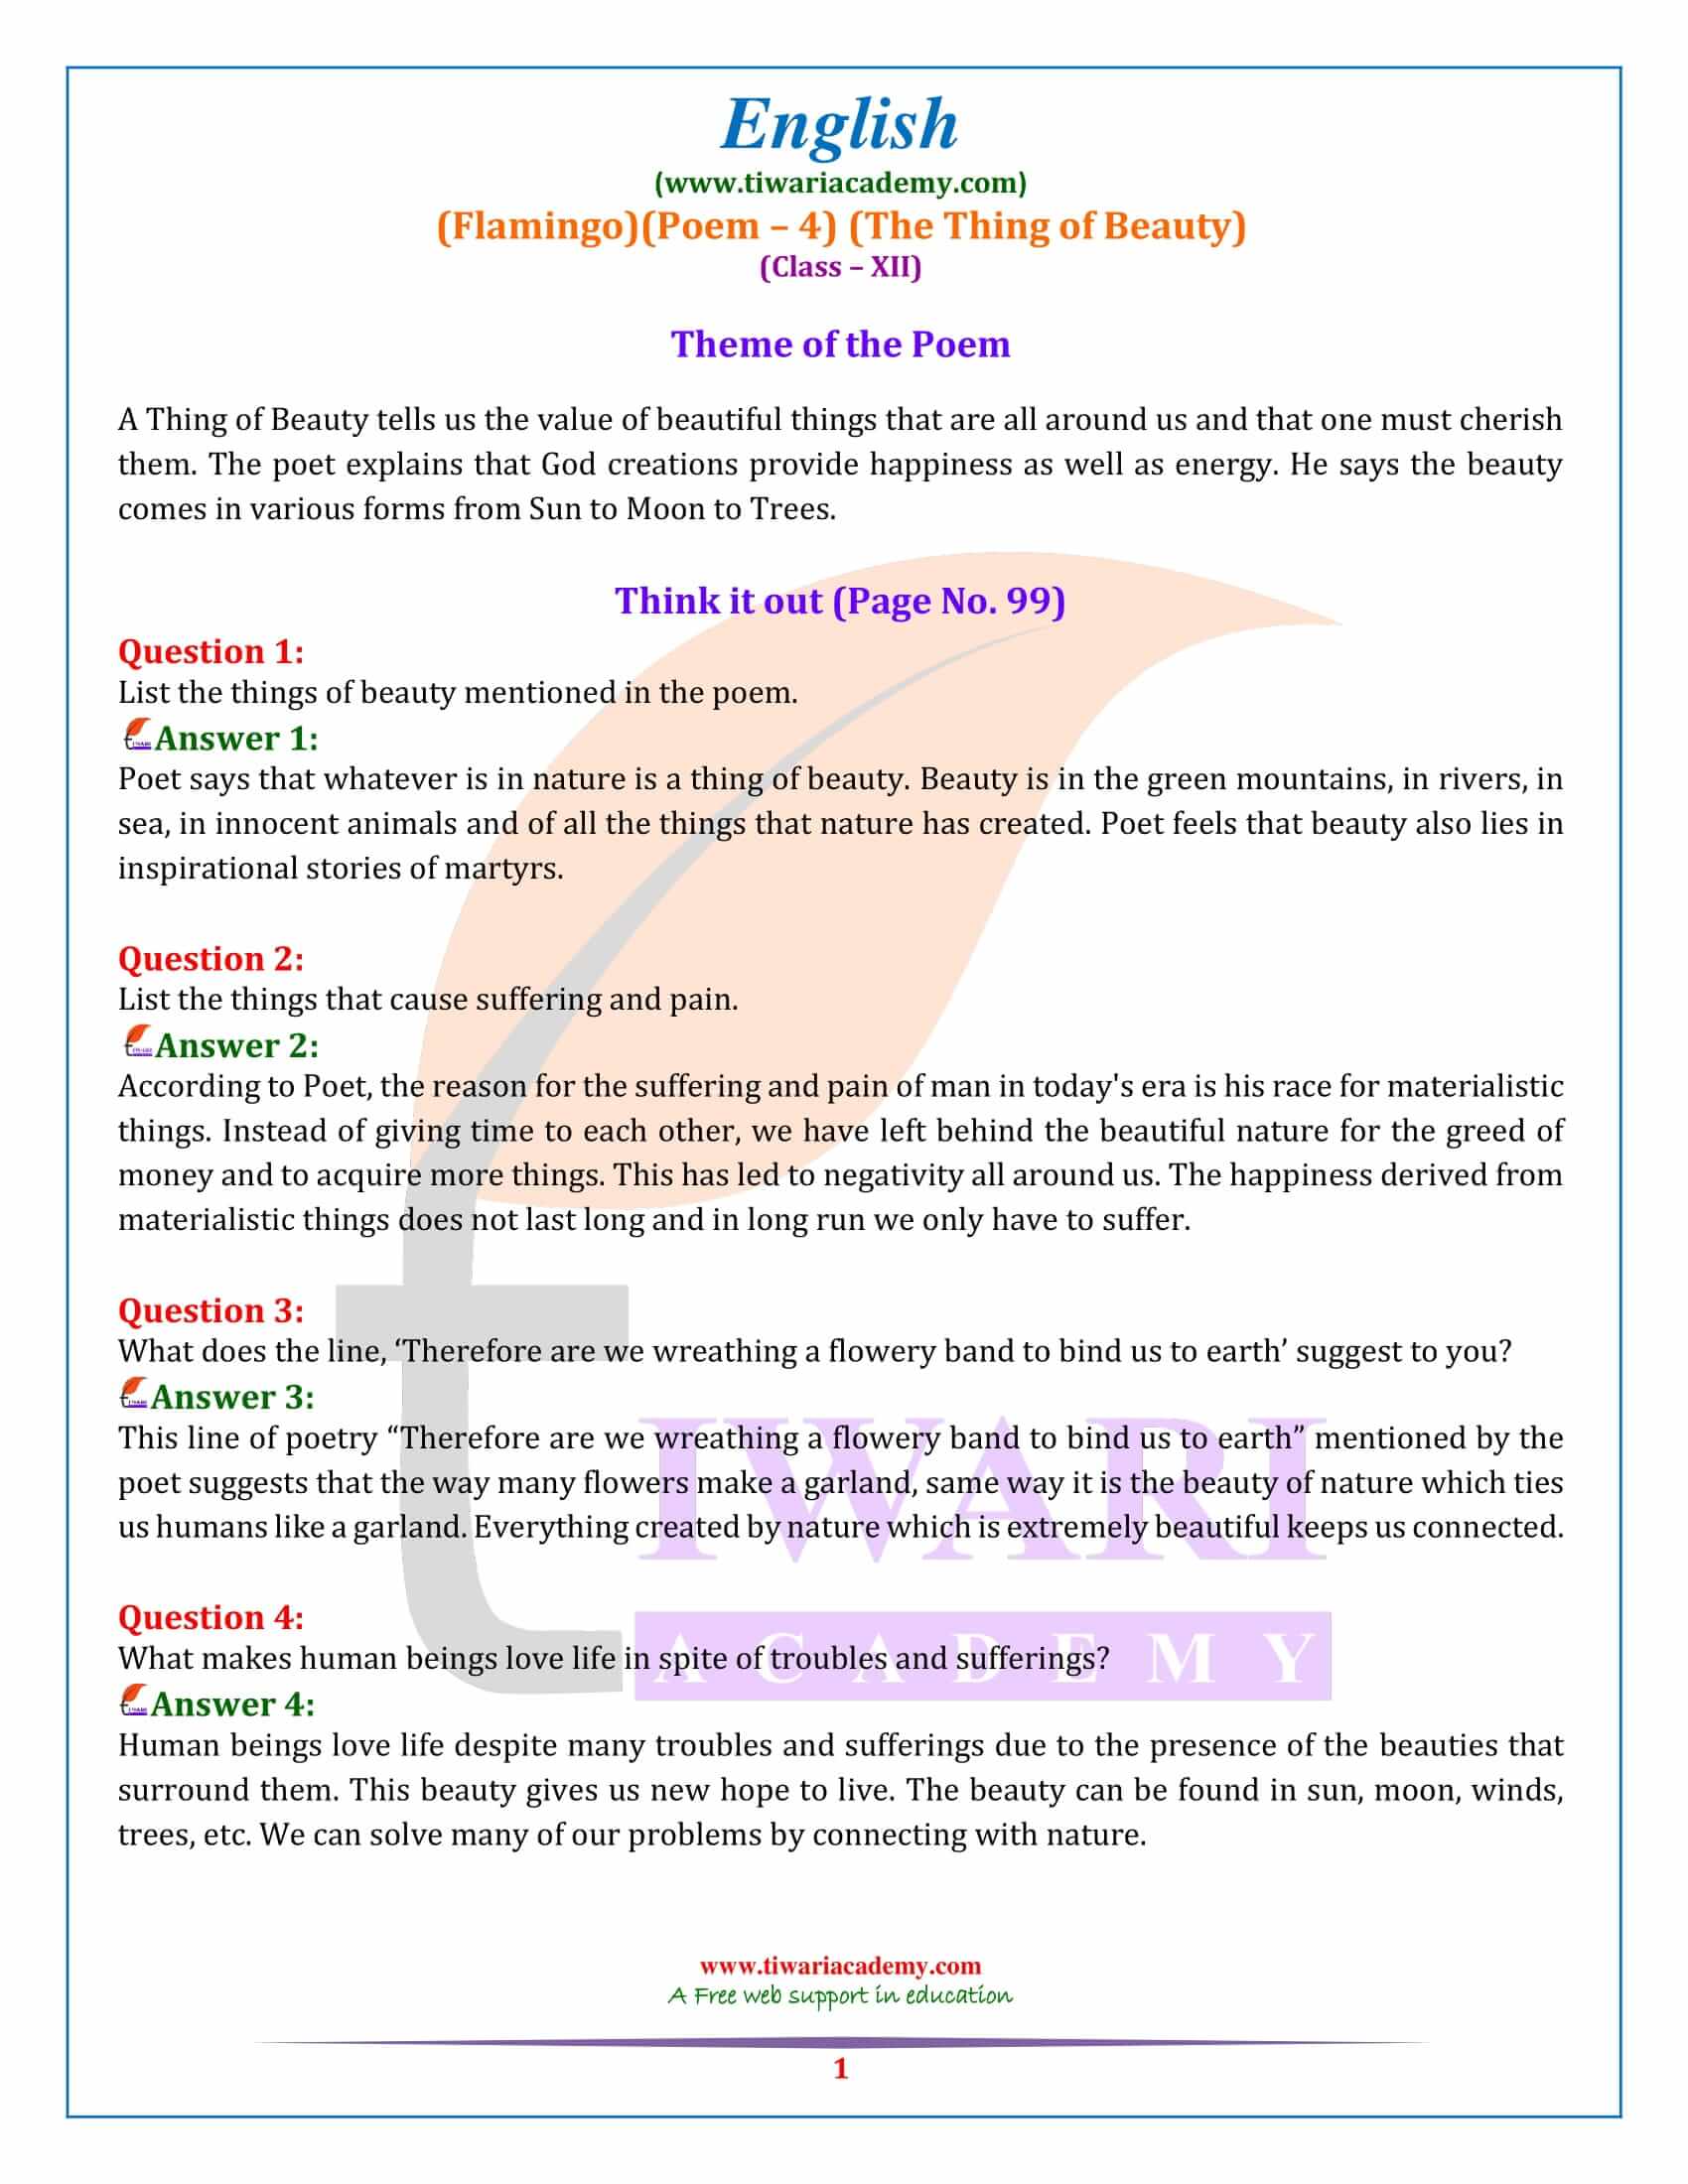 NCERT Solutions for Class 12 English Poem 4